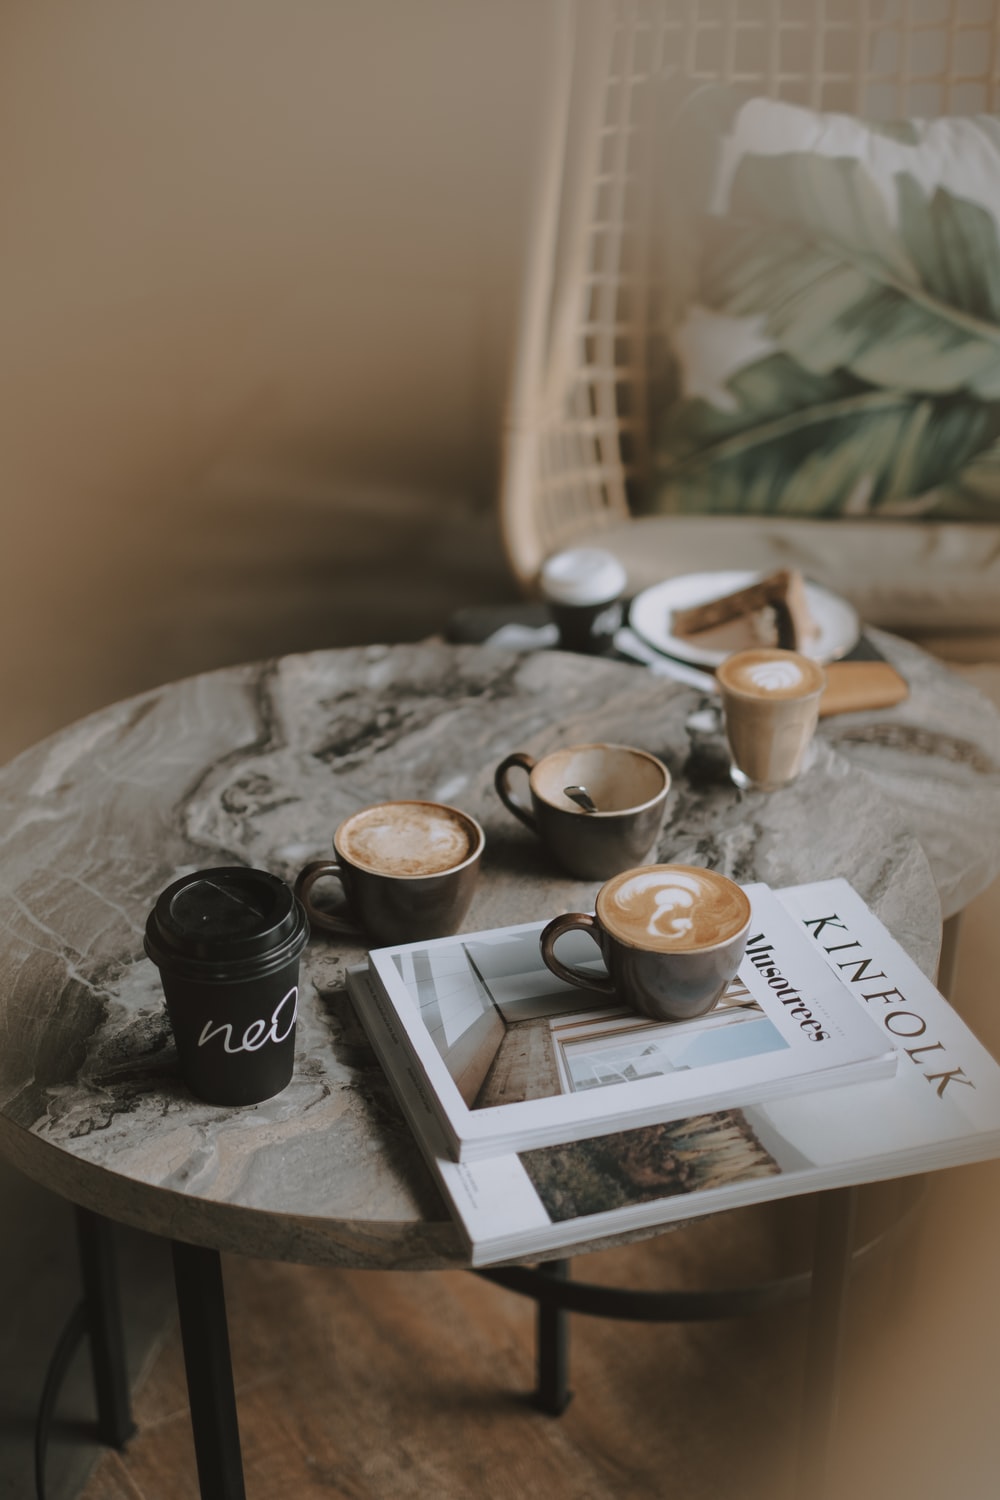 Coffee Aesthetic Picture. Download Free Image